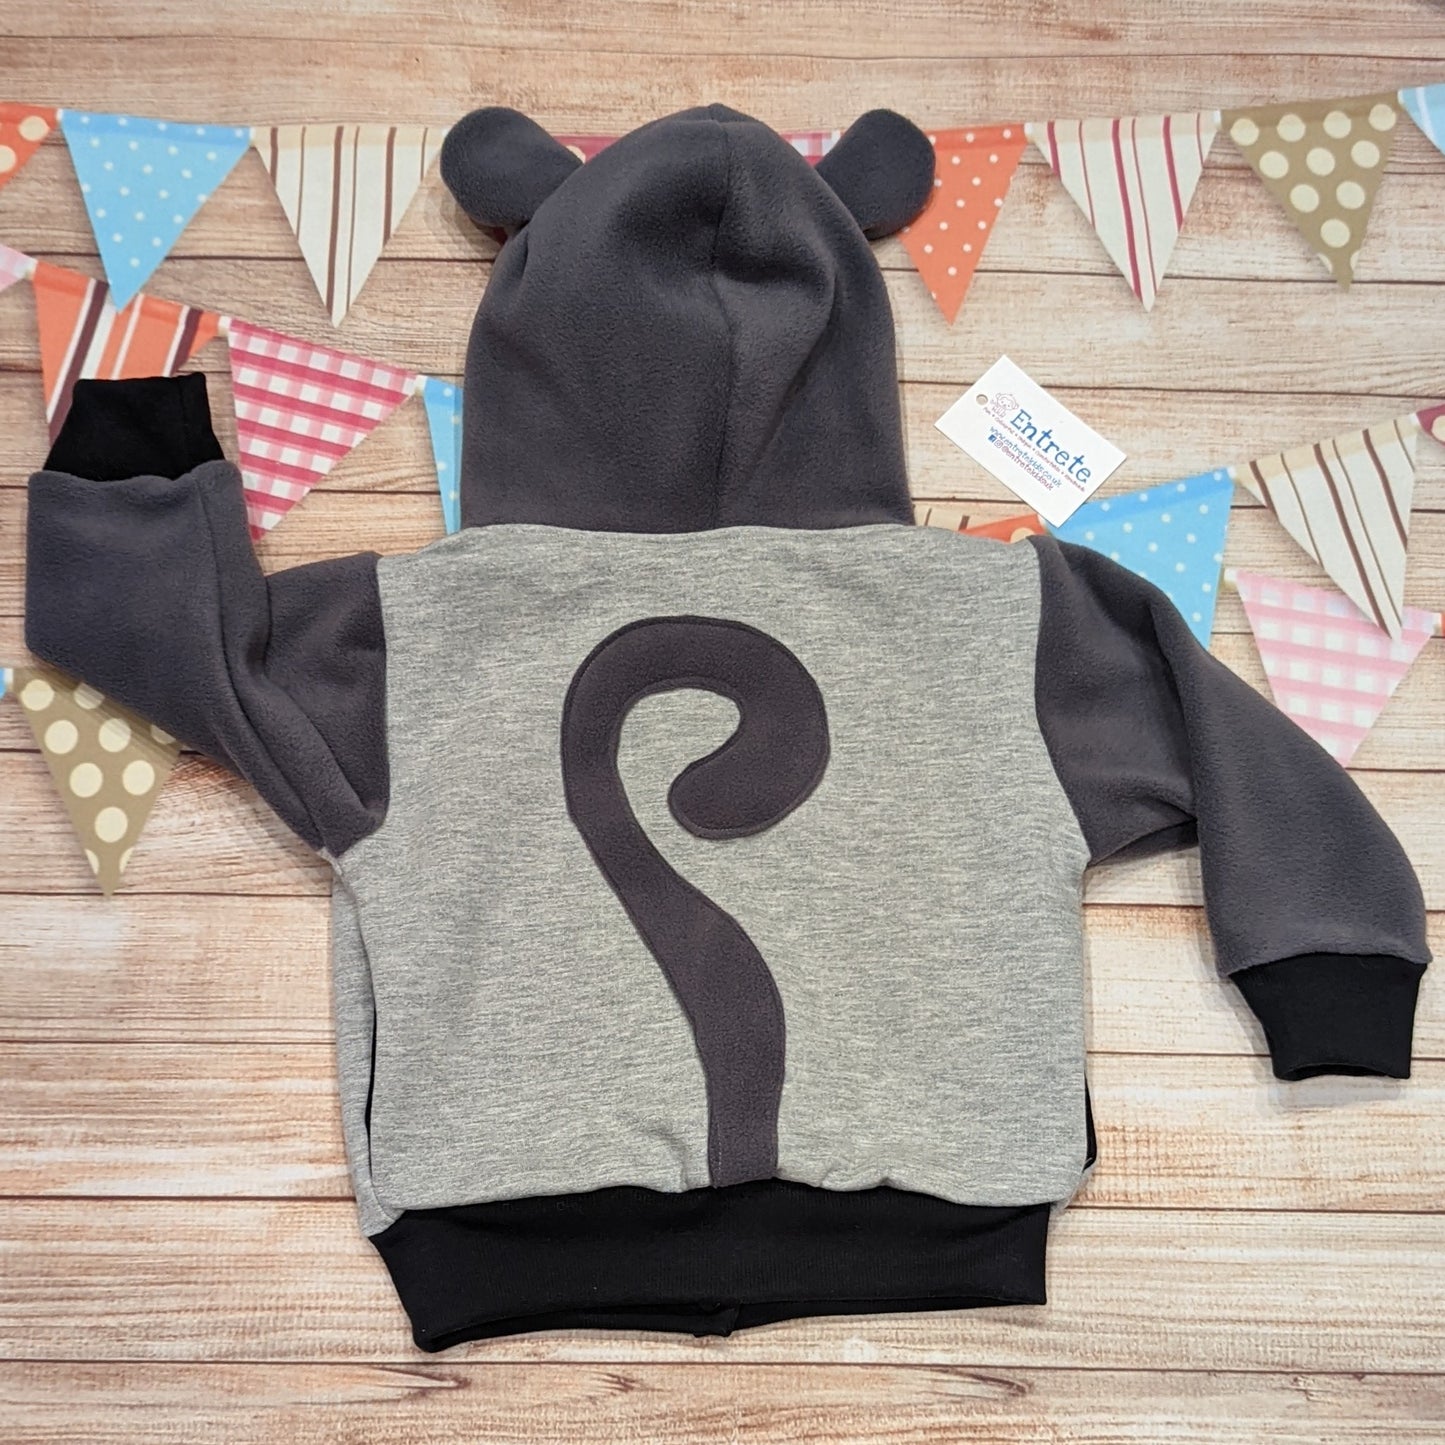 The reversible cat hoodie featuring fun tail and ear detailing. Handmade using grey polar fleece, light grey cotton french terry, black organic cotton jersey and graphite ribbing. The reverse is made using pink cheetah print cotton jersey. This cat hoodie is so unique and is great for imaginative play. Shown from the rear, with it's fun cats tail.